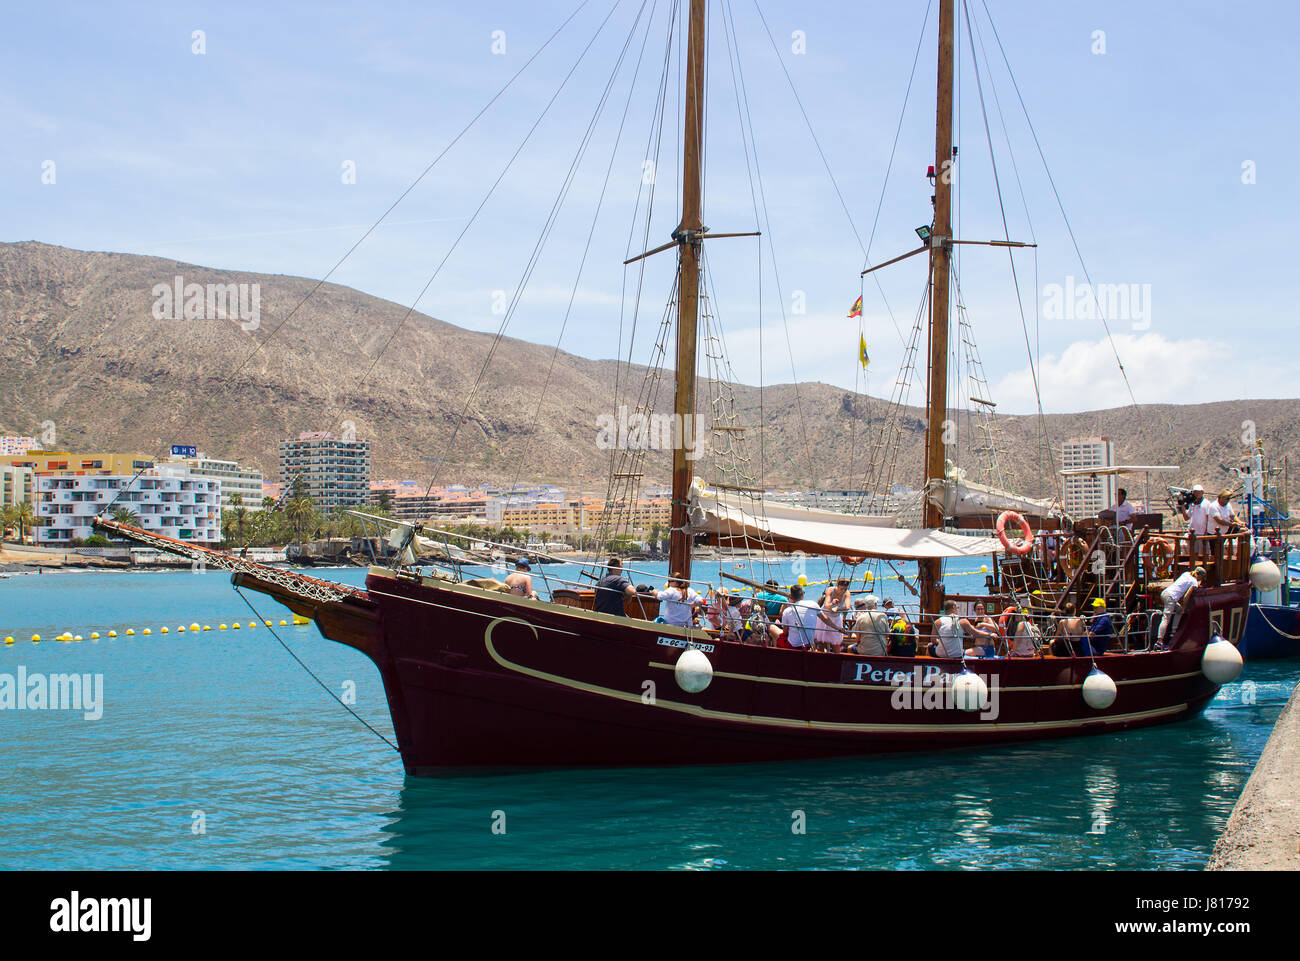 The retro galleon Peter Pan used for tourists fun tours in Teneriffe leaves the quayside at Los Cristianos with crew and passengers on board Stock Photo